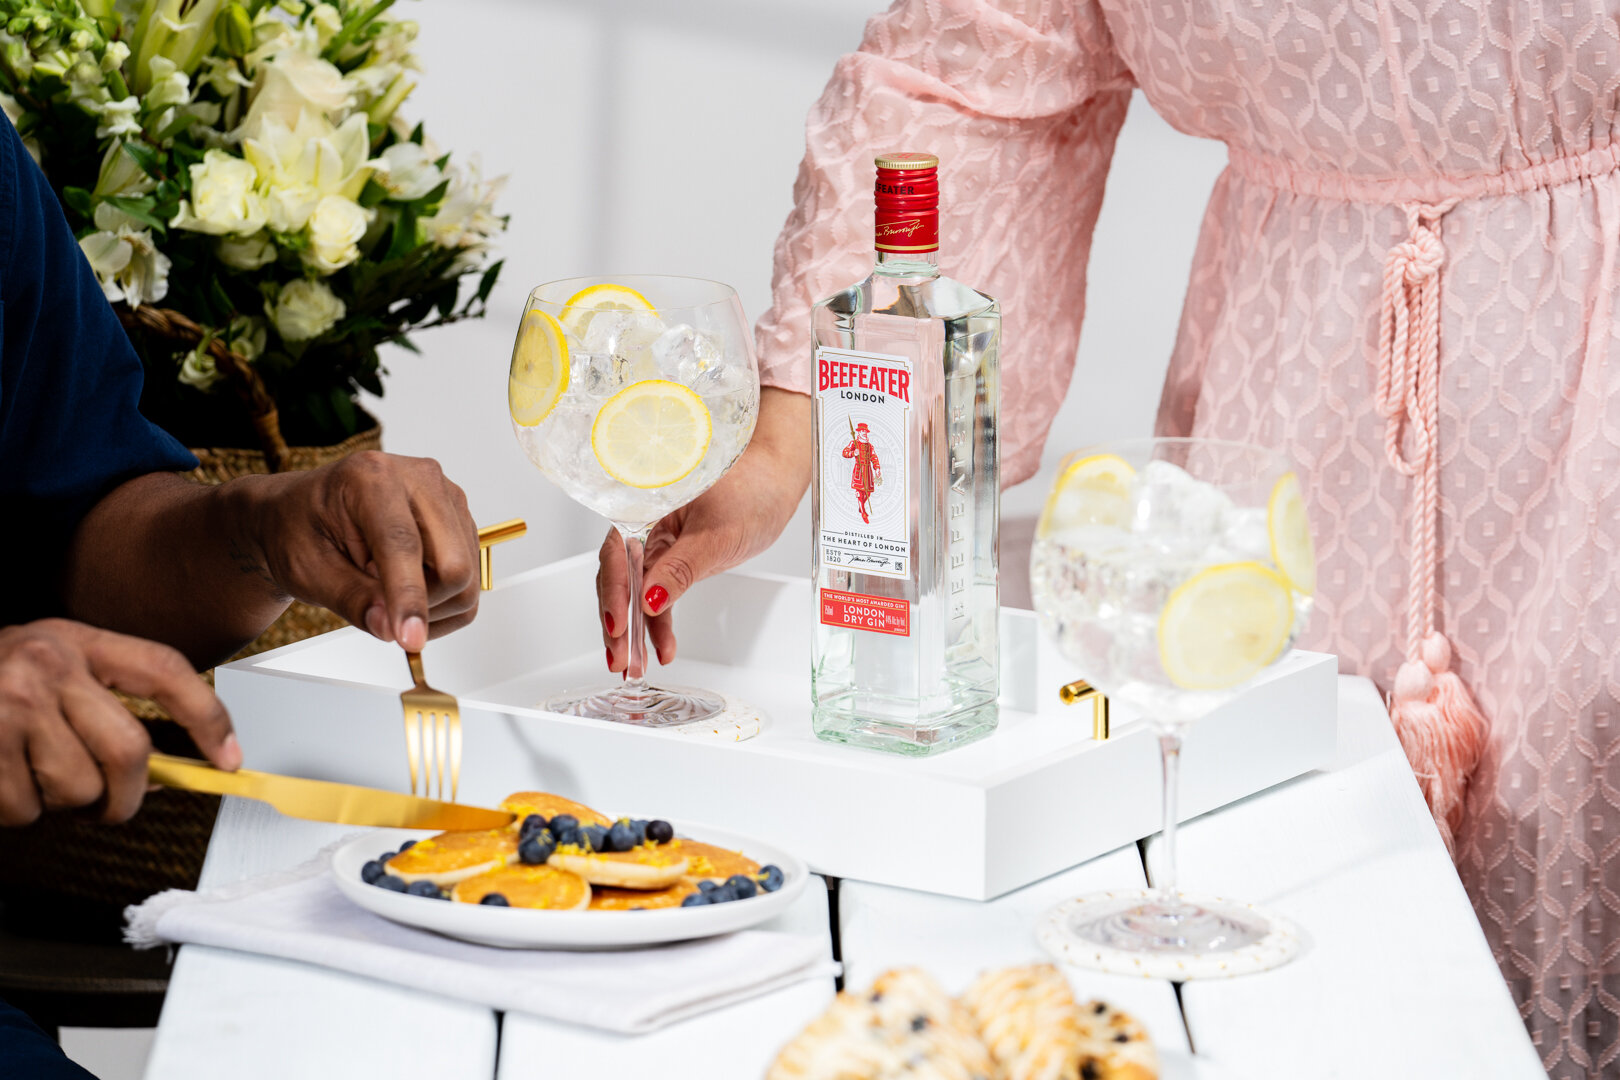 11_BeefeaterGardenParty_GinTonic_Bottle_1080px.jpg